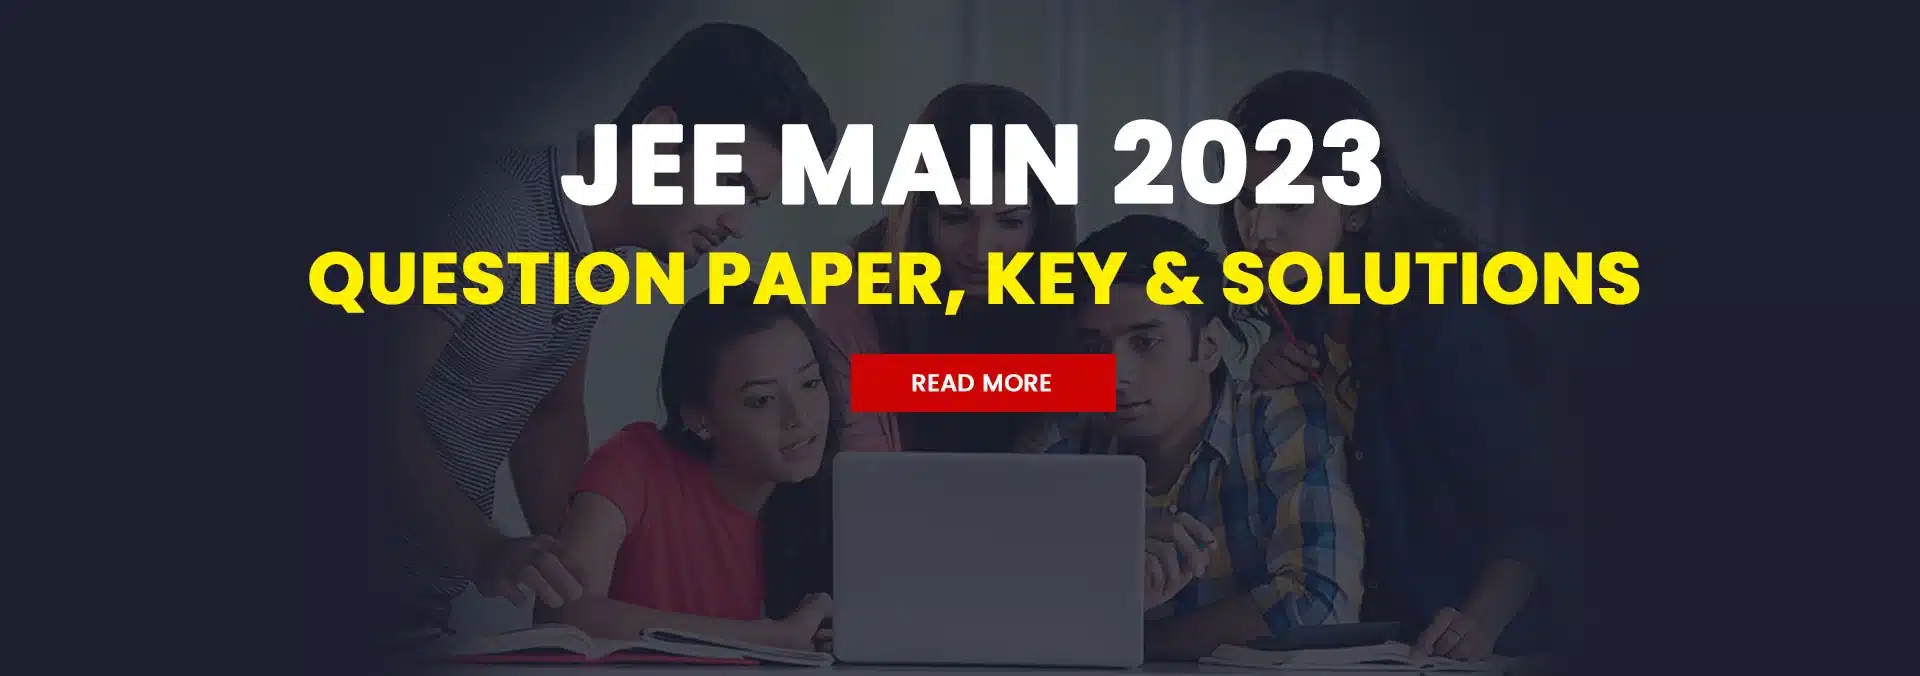 Jee main 2023 question paper and solutiions